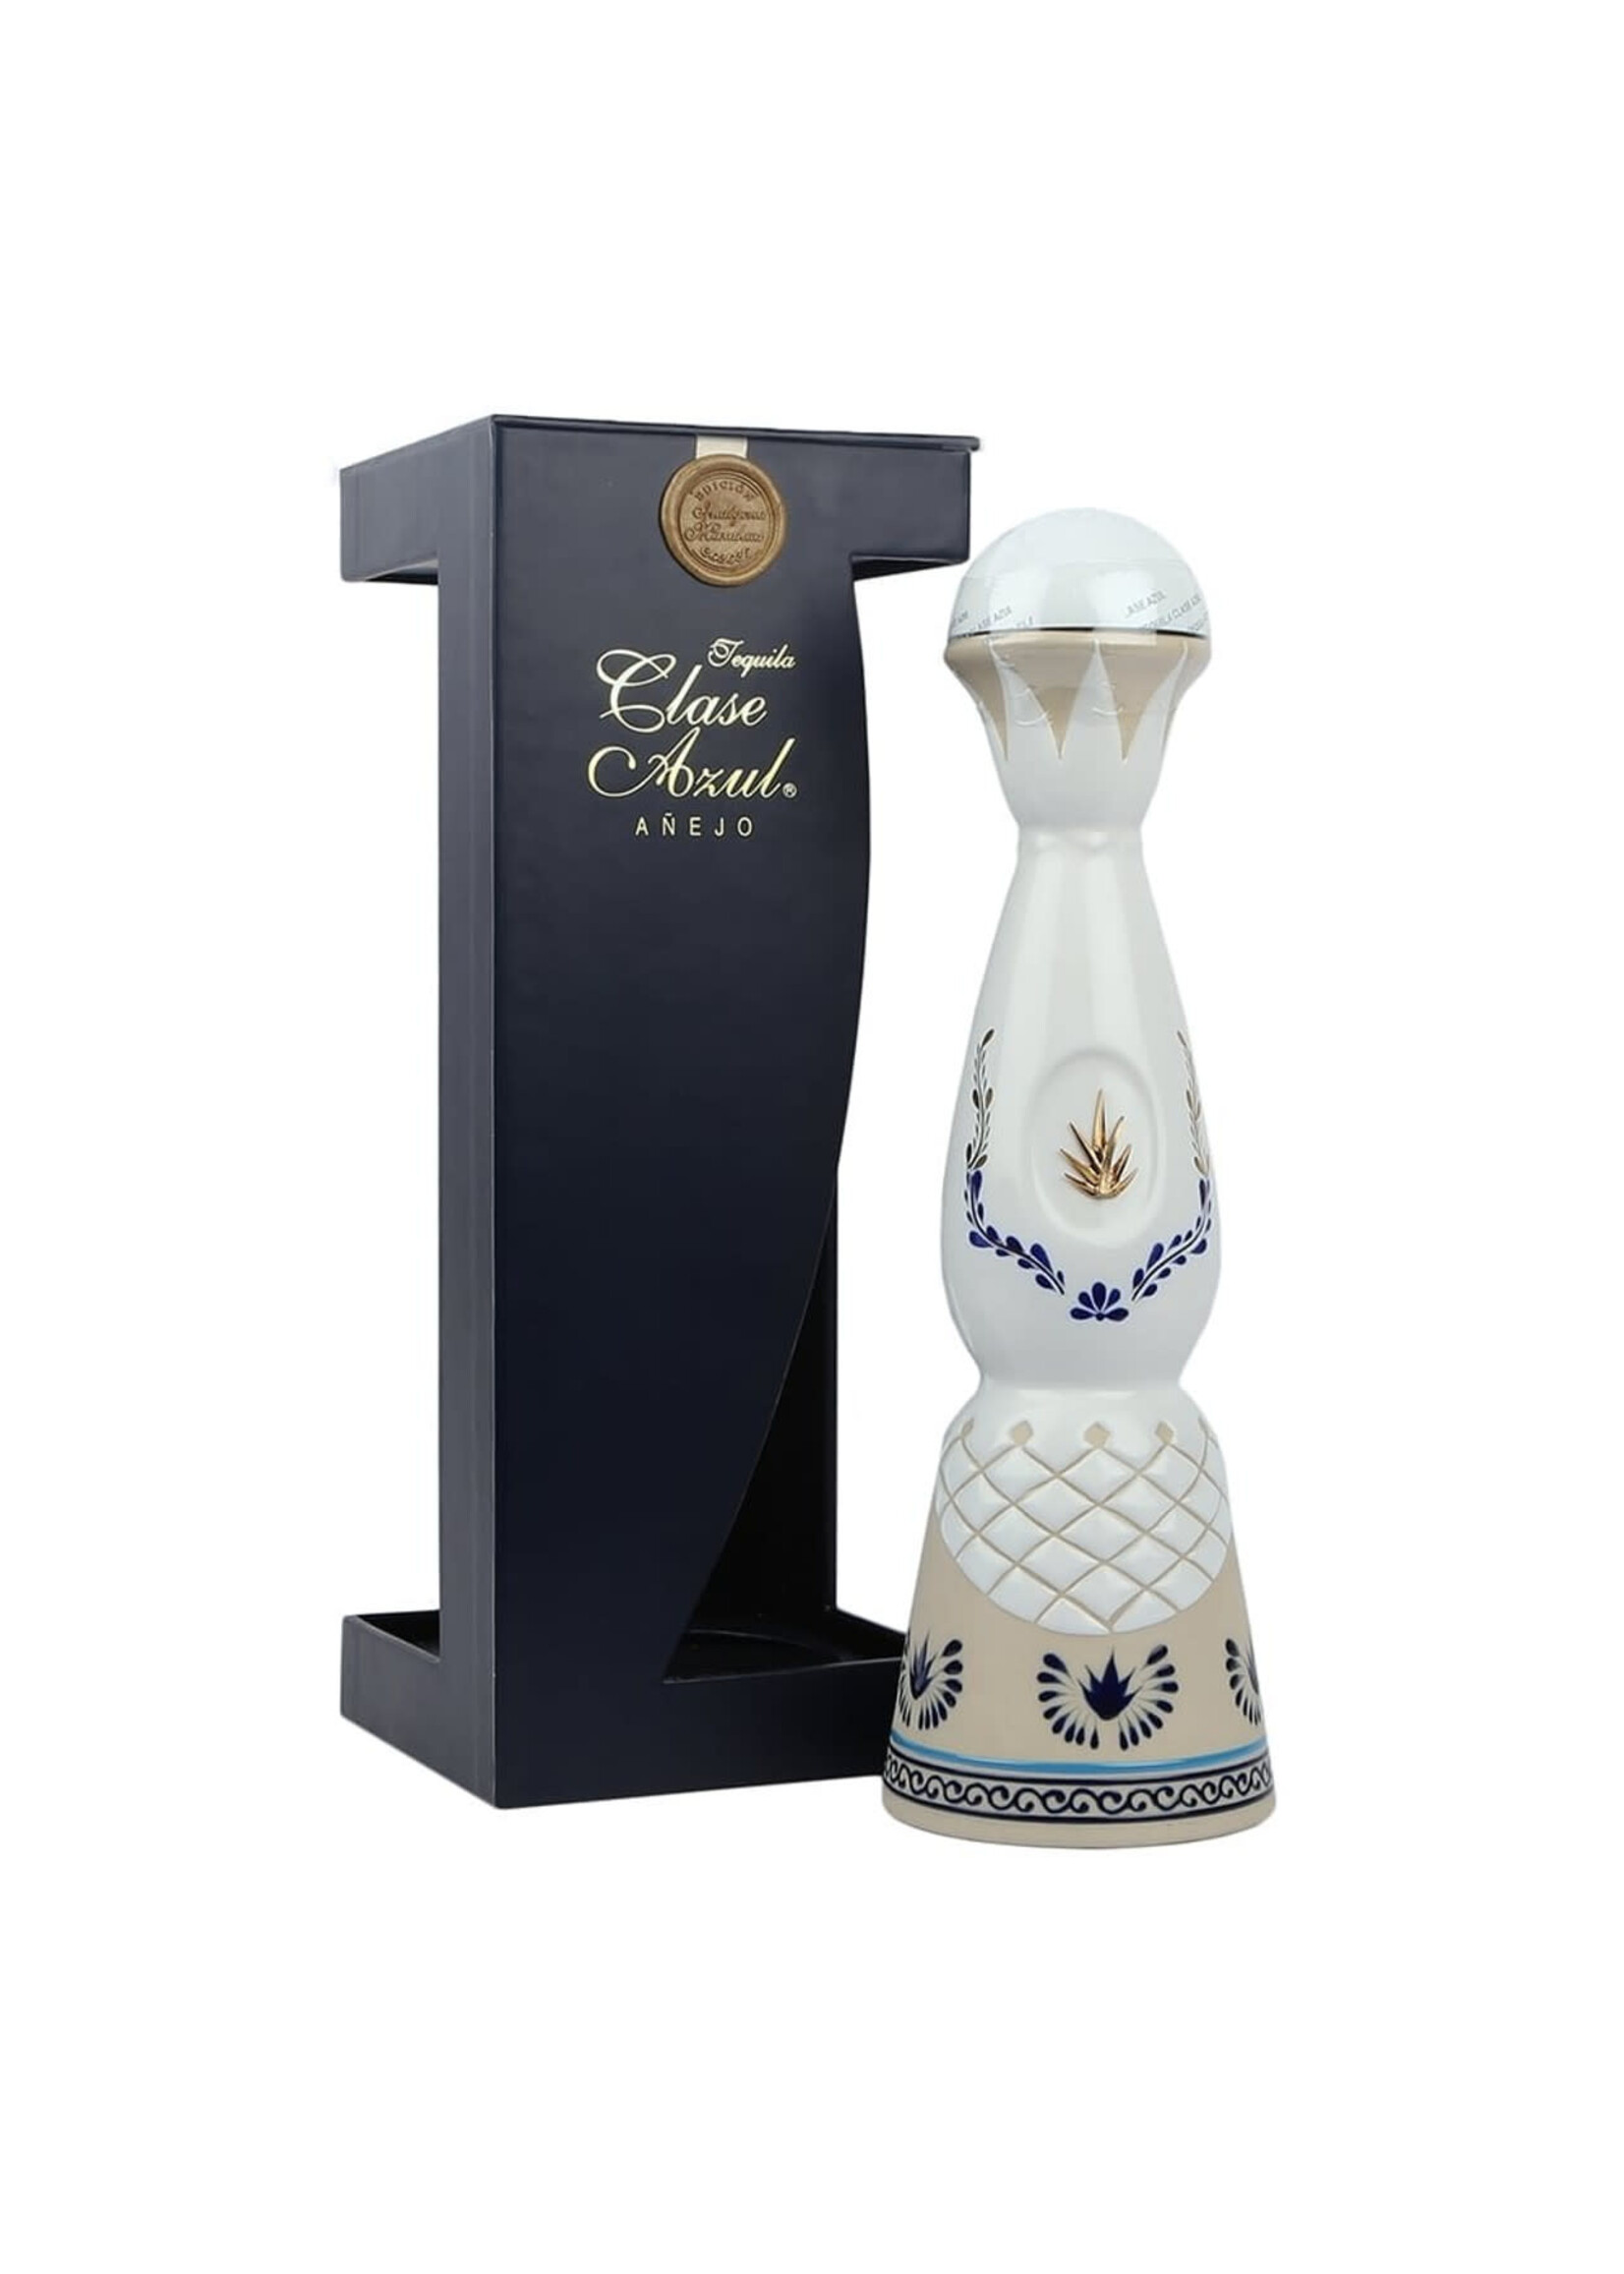 Clase Azul Anejo Tequila 80Proof 750ml